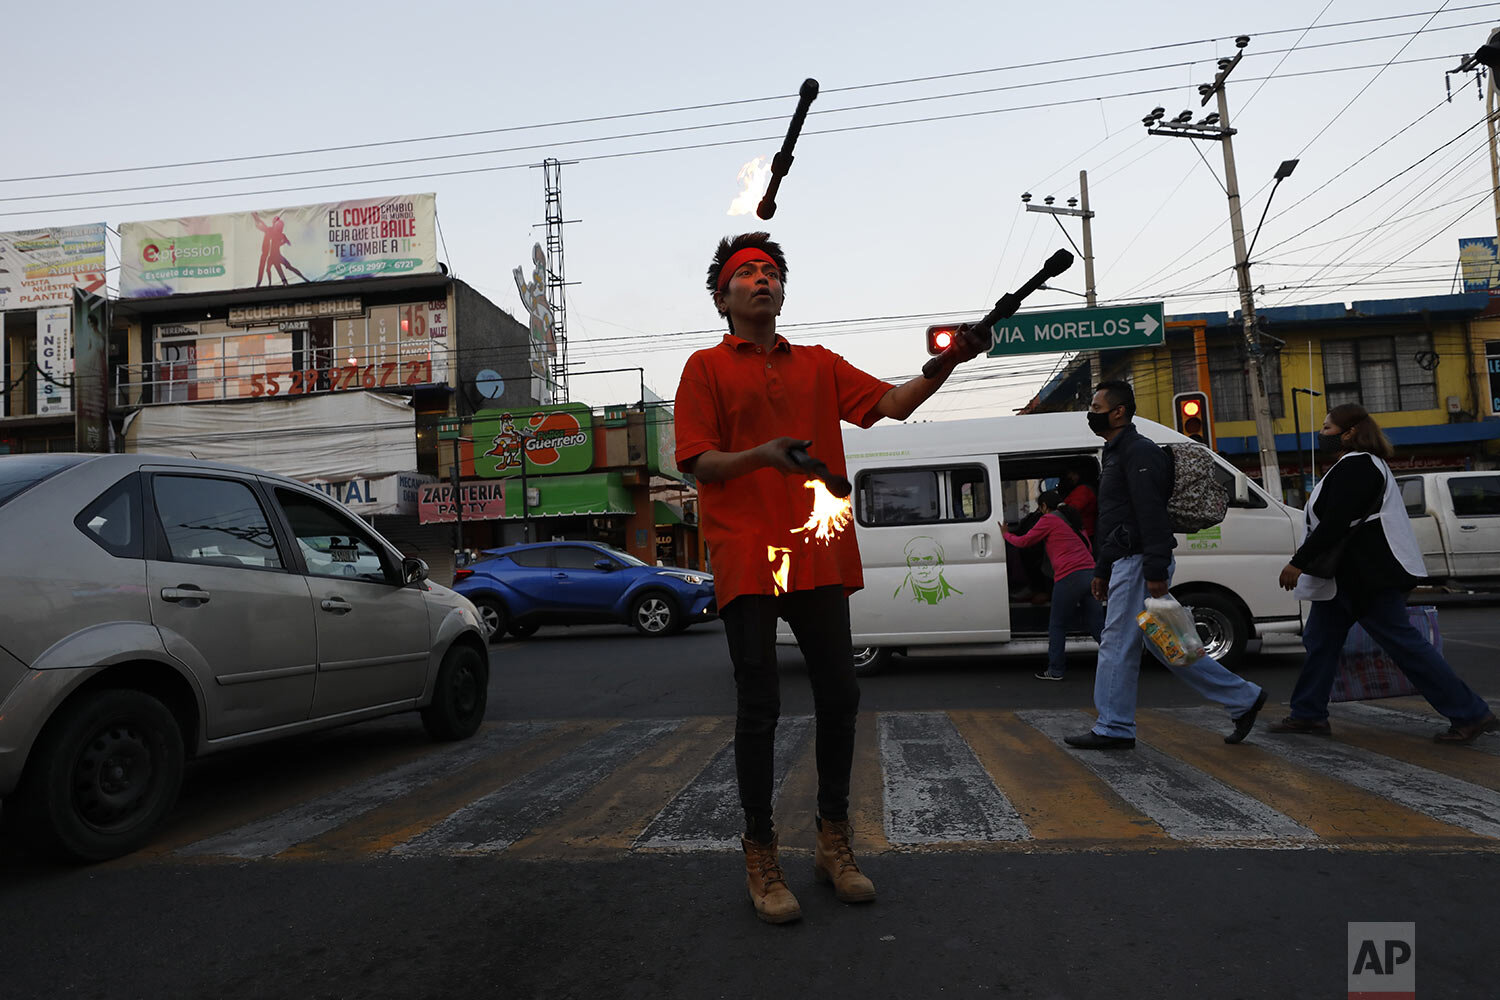  Willian Ramirez Lopez juggles fire to earn tips from passing motorists in Ecatepec, Mexico State, where a state mandate calls for nonessential businesses to close at 5 p.m., to help slow the spread of COVID-19 on the outskirts of Mexico City, Monday, Dec. 14, 2020. (AP Photo/Rebecca Blackwell) 